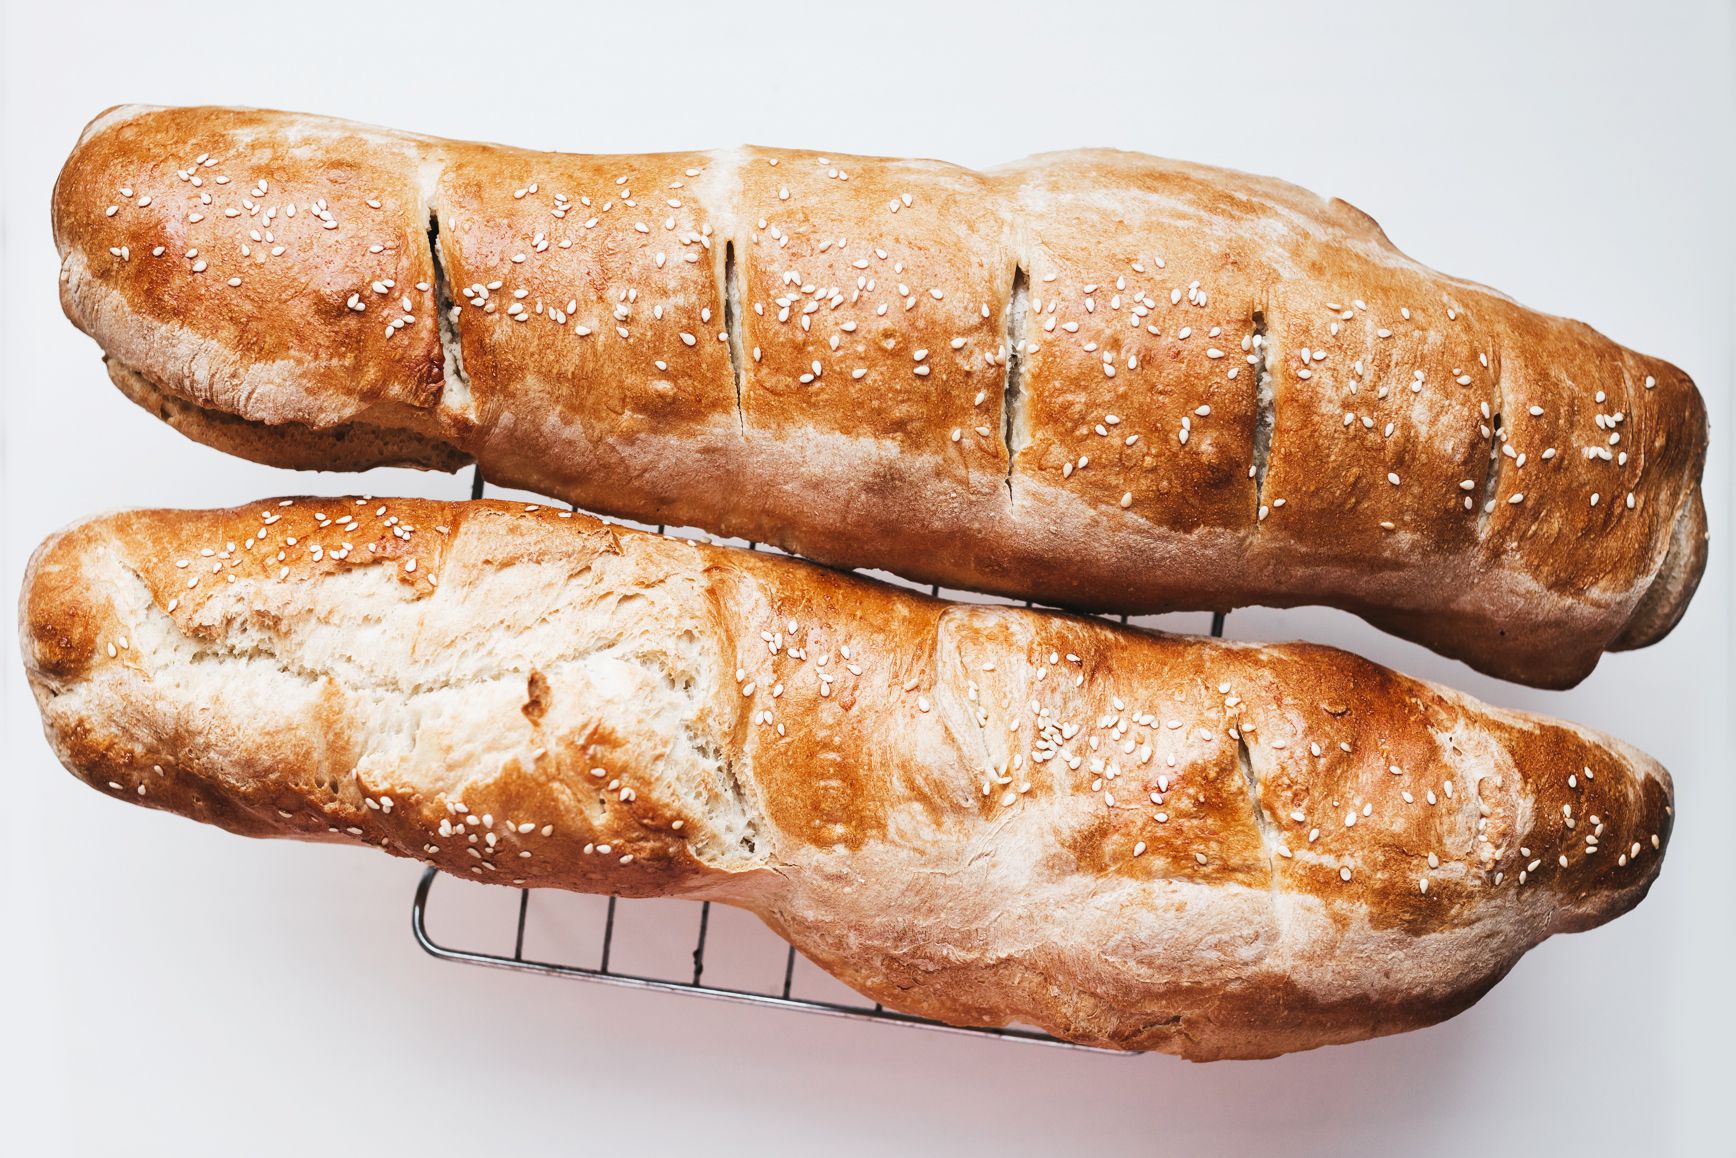 Easy French bread